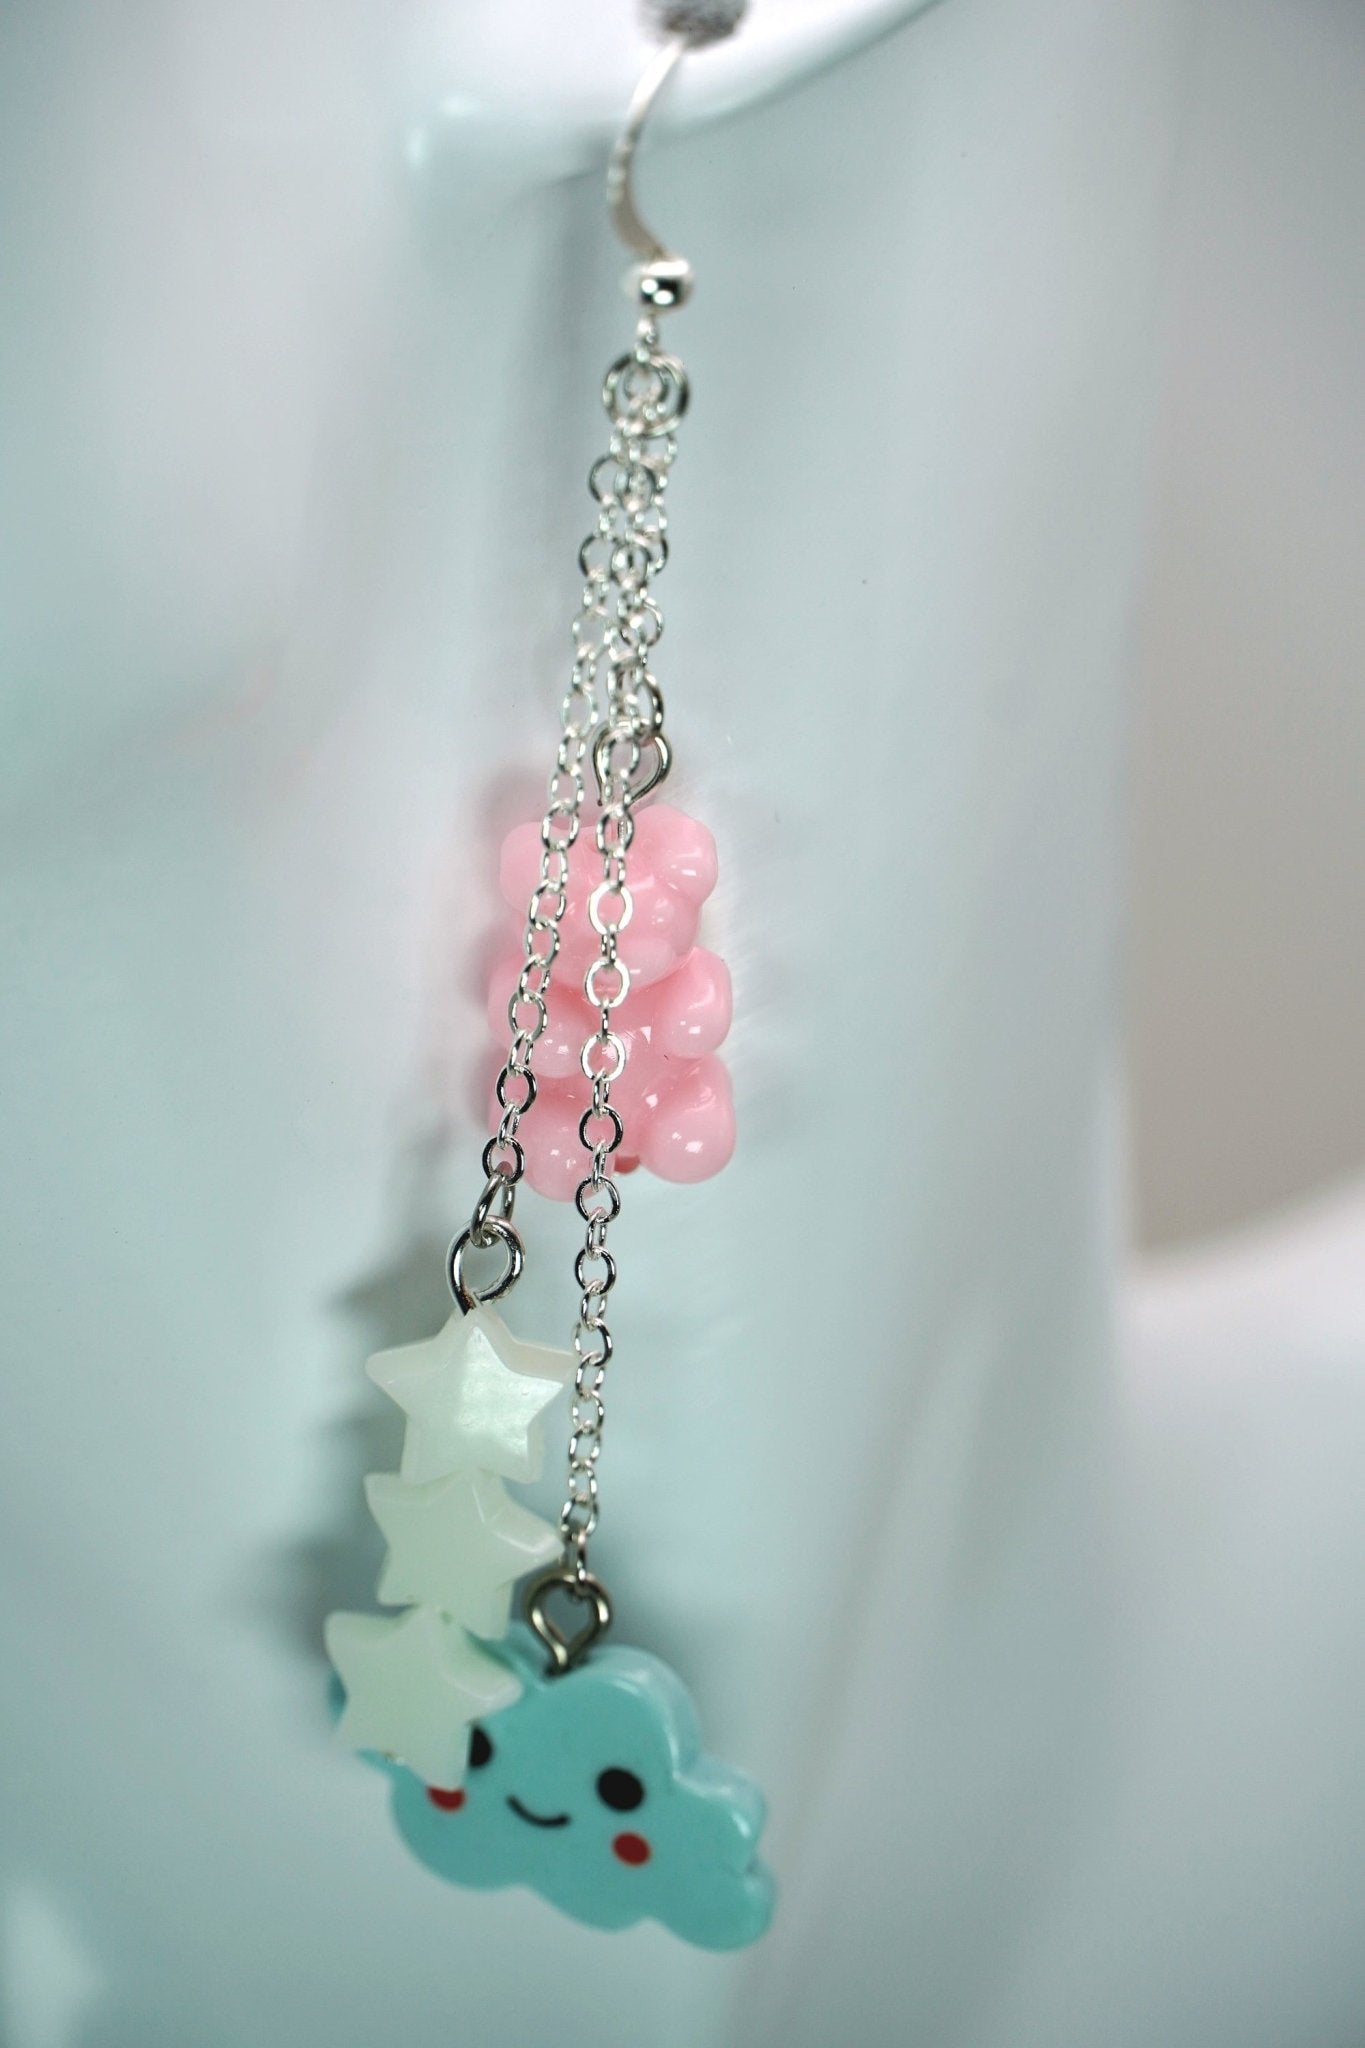 Trans Pride Pastel Cloud Earrings, Trans Flag Colored Earrings with Pink Gummy Bears, White Stars, and Blue Clouds, Pride 2024 - Dekowaii Jewelry Company